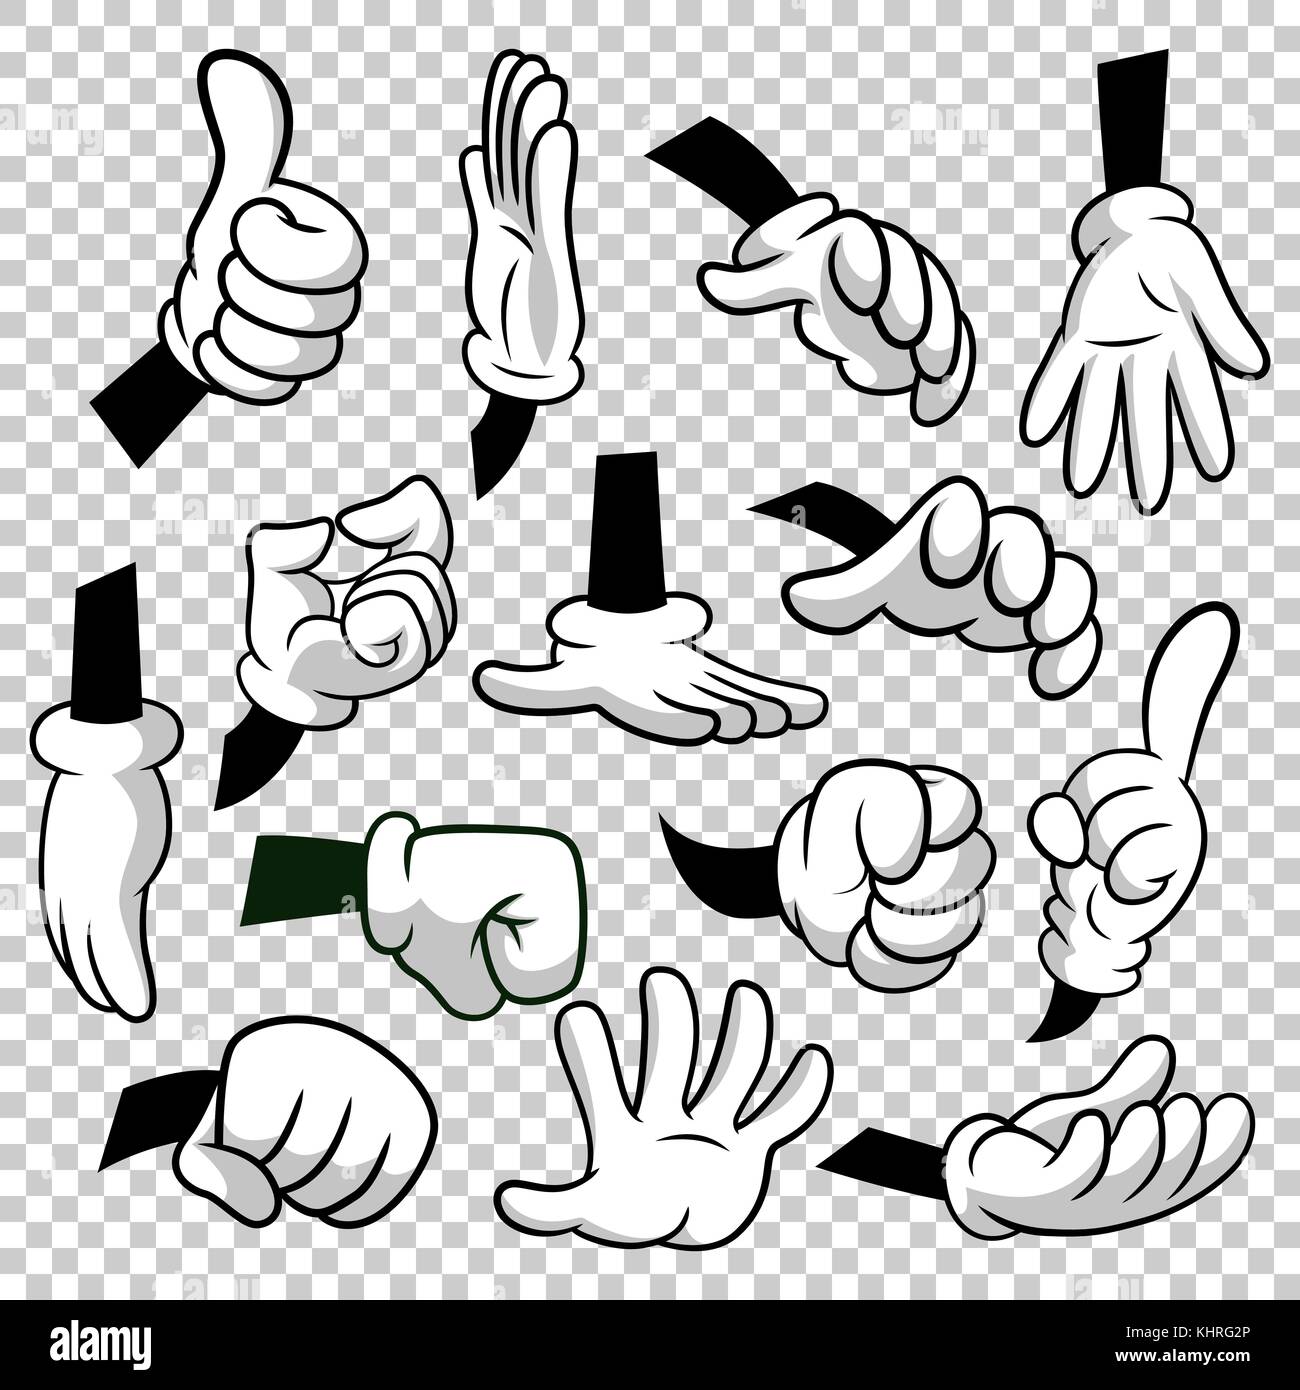 Cartoon hands with gloves icon set isolated on transparent background. Vector clipart - parts of body, arms in white gloves. Hand gesture collection. Design templates in EPS8. Stock Vector